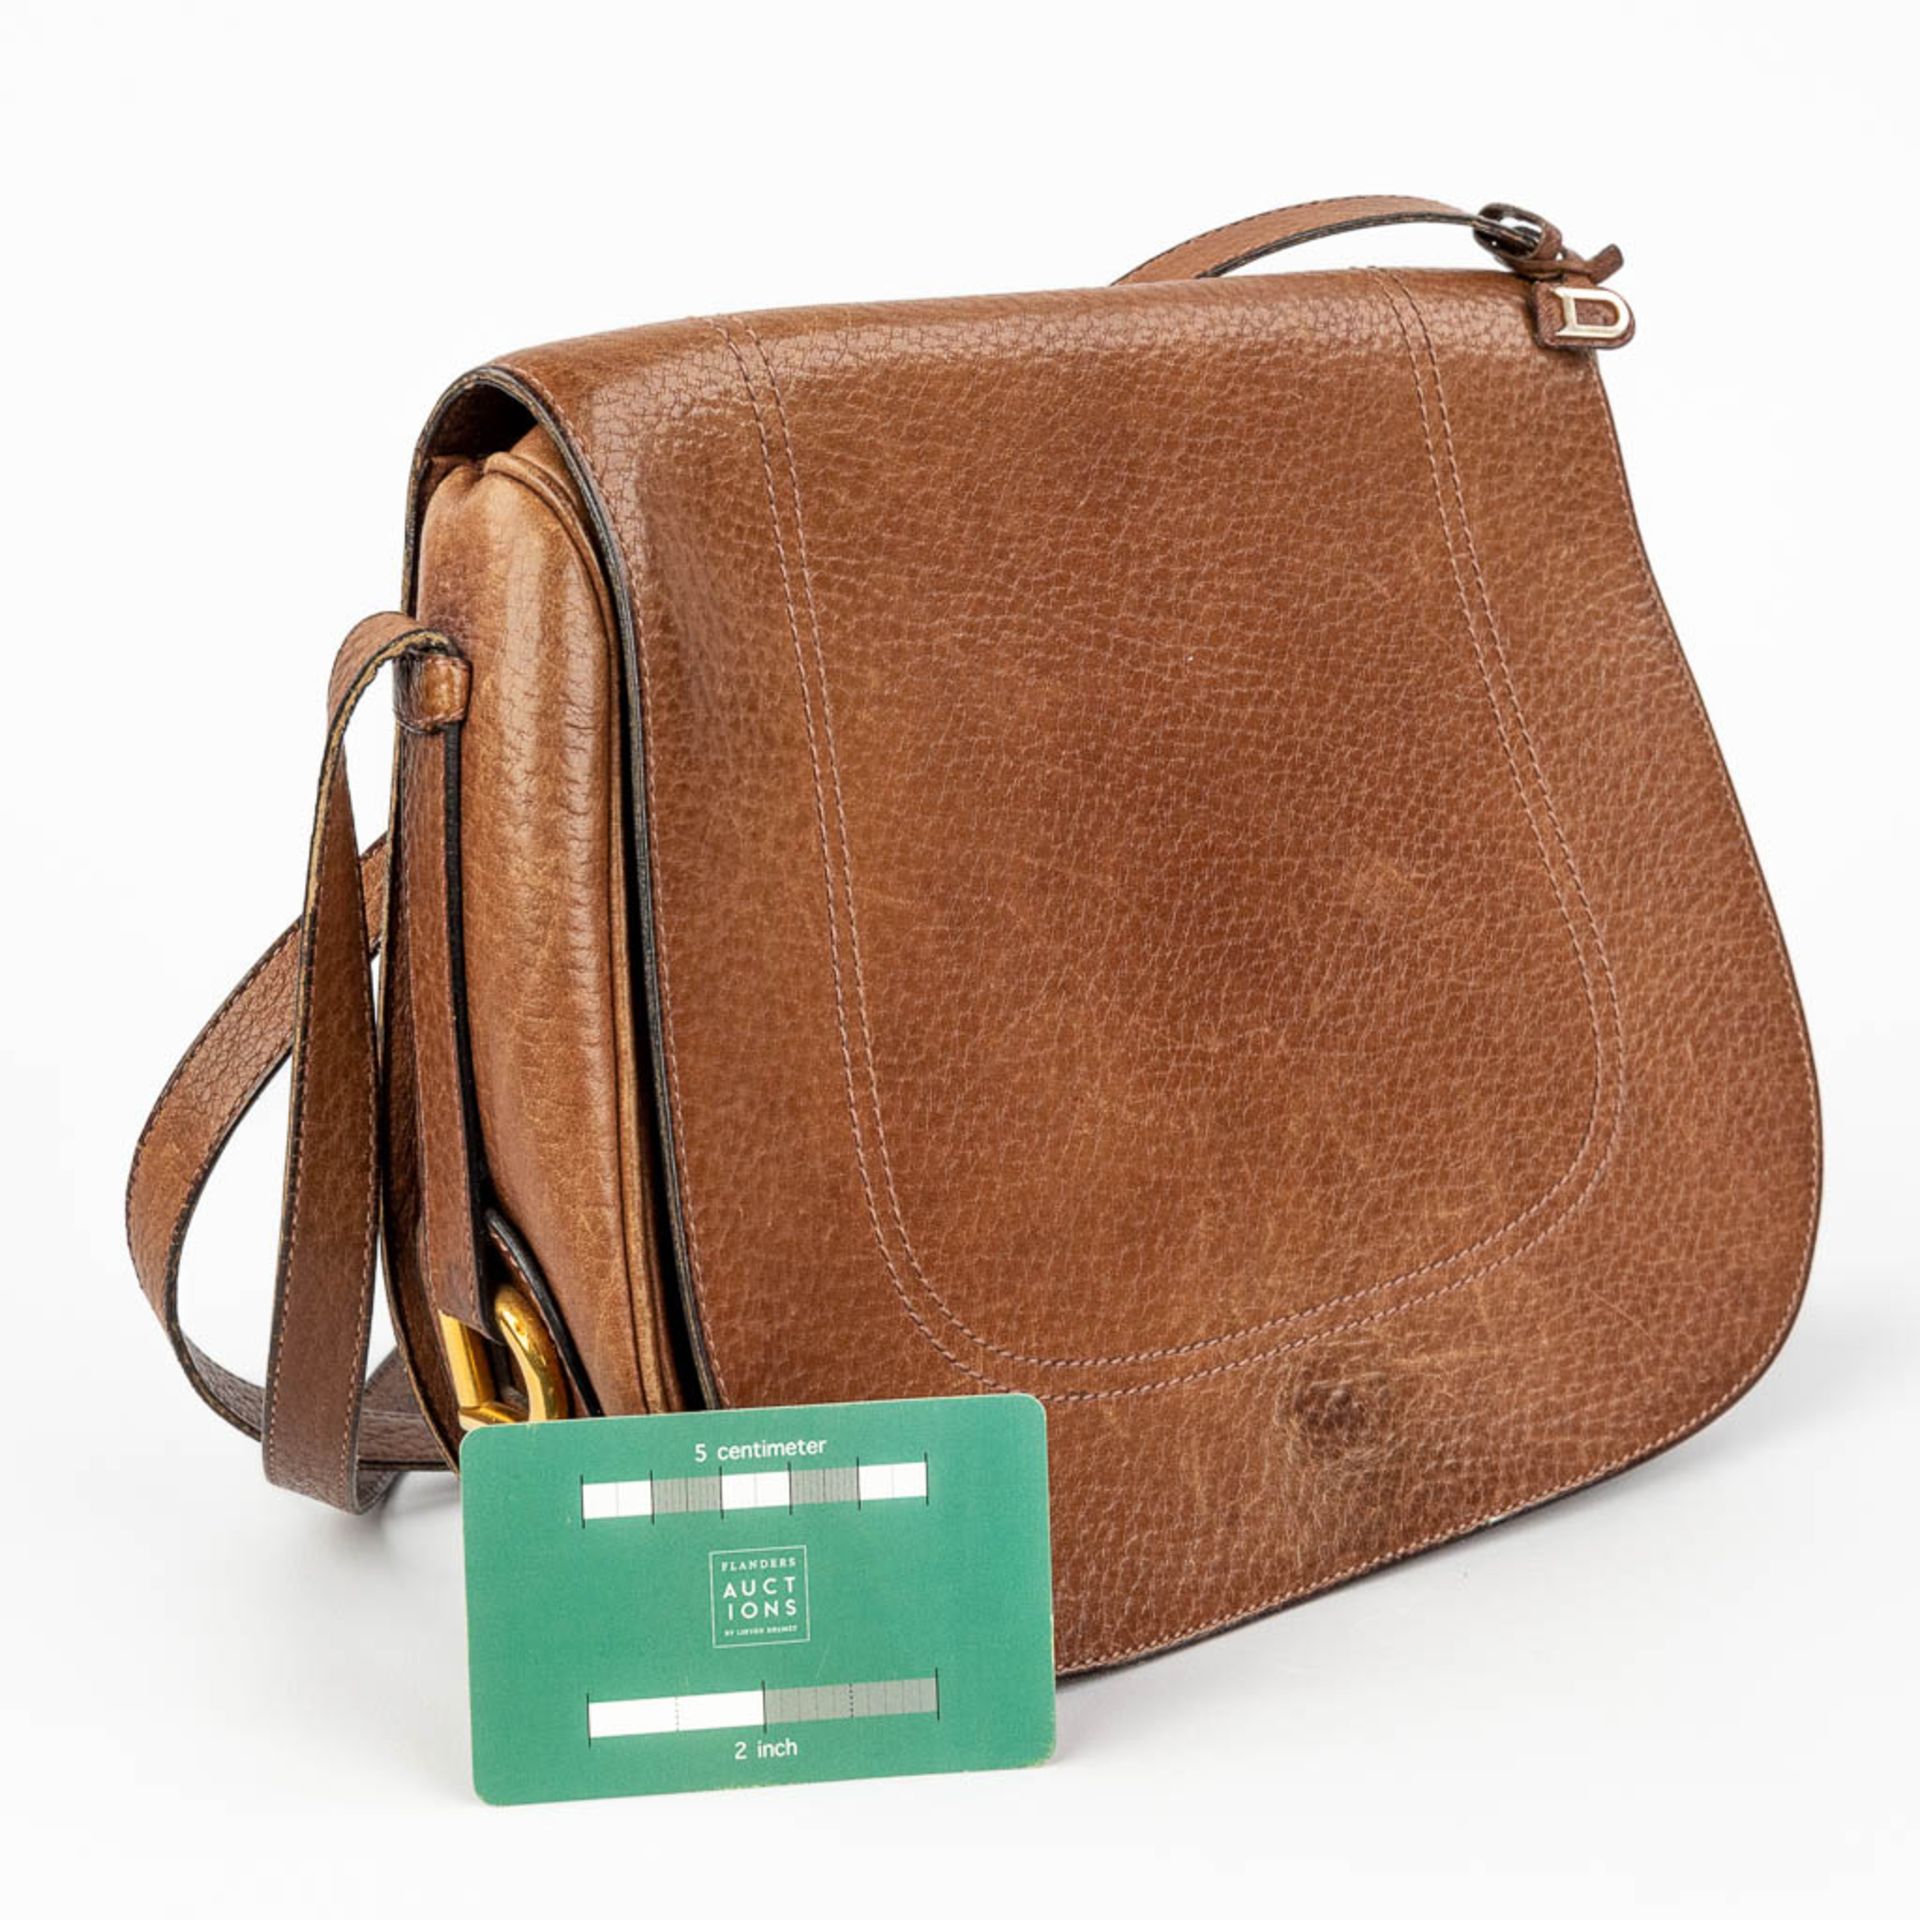 Delvaux, a cross-body handbag made of brown leather. (W:26 x H:22 cm) - Image 10 of 16